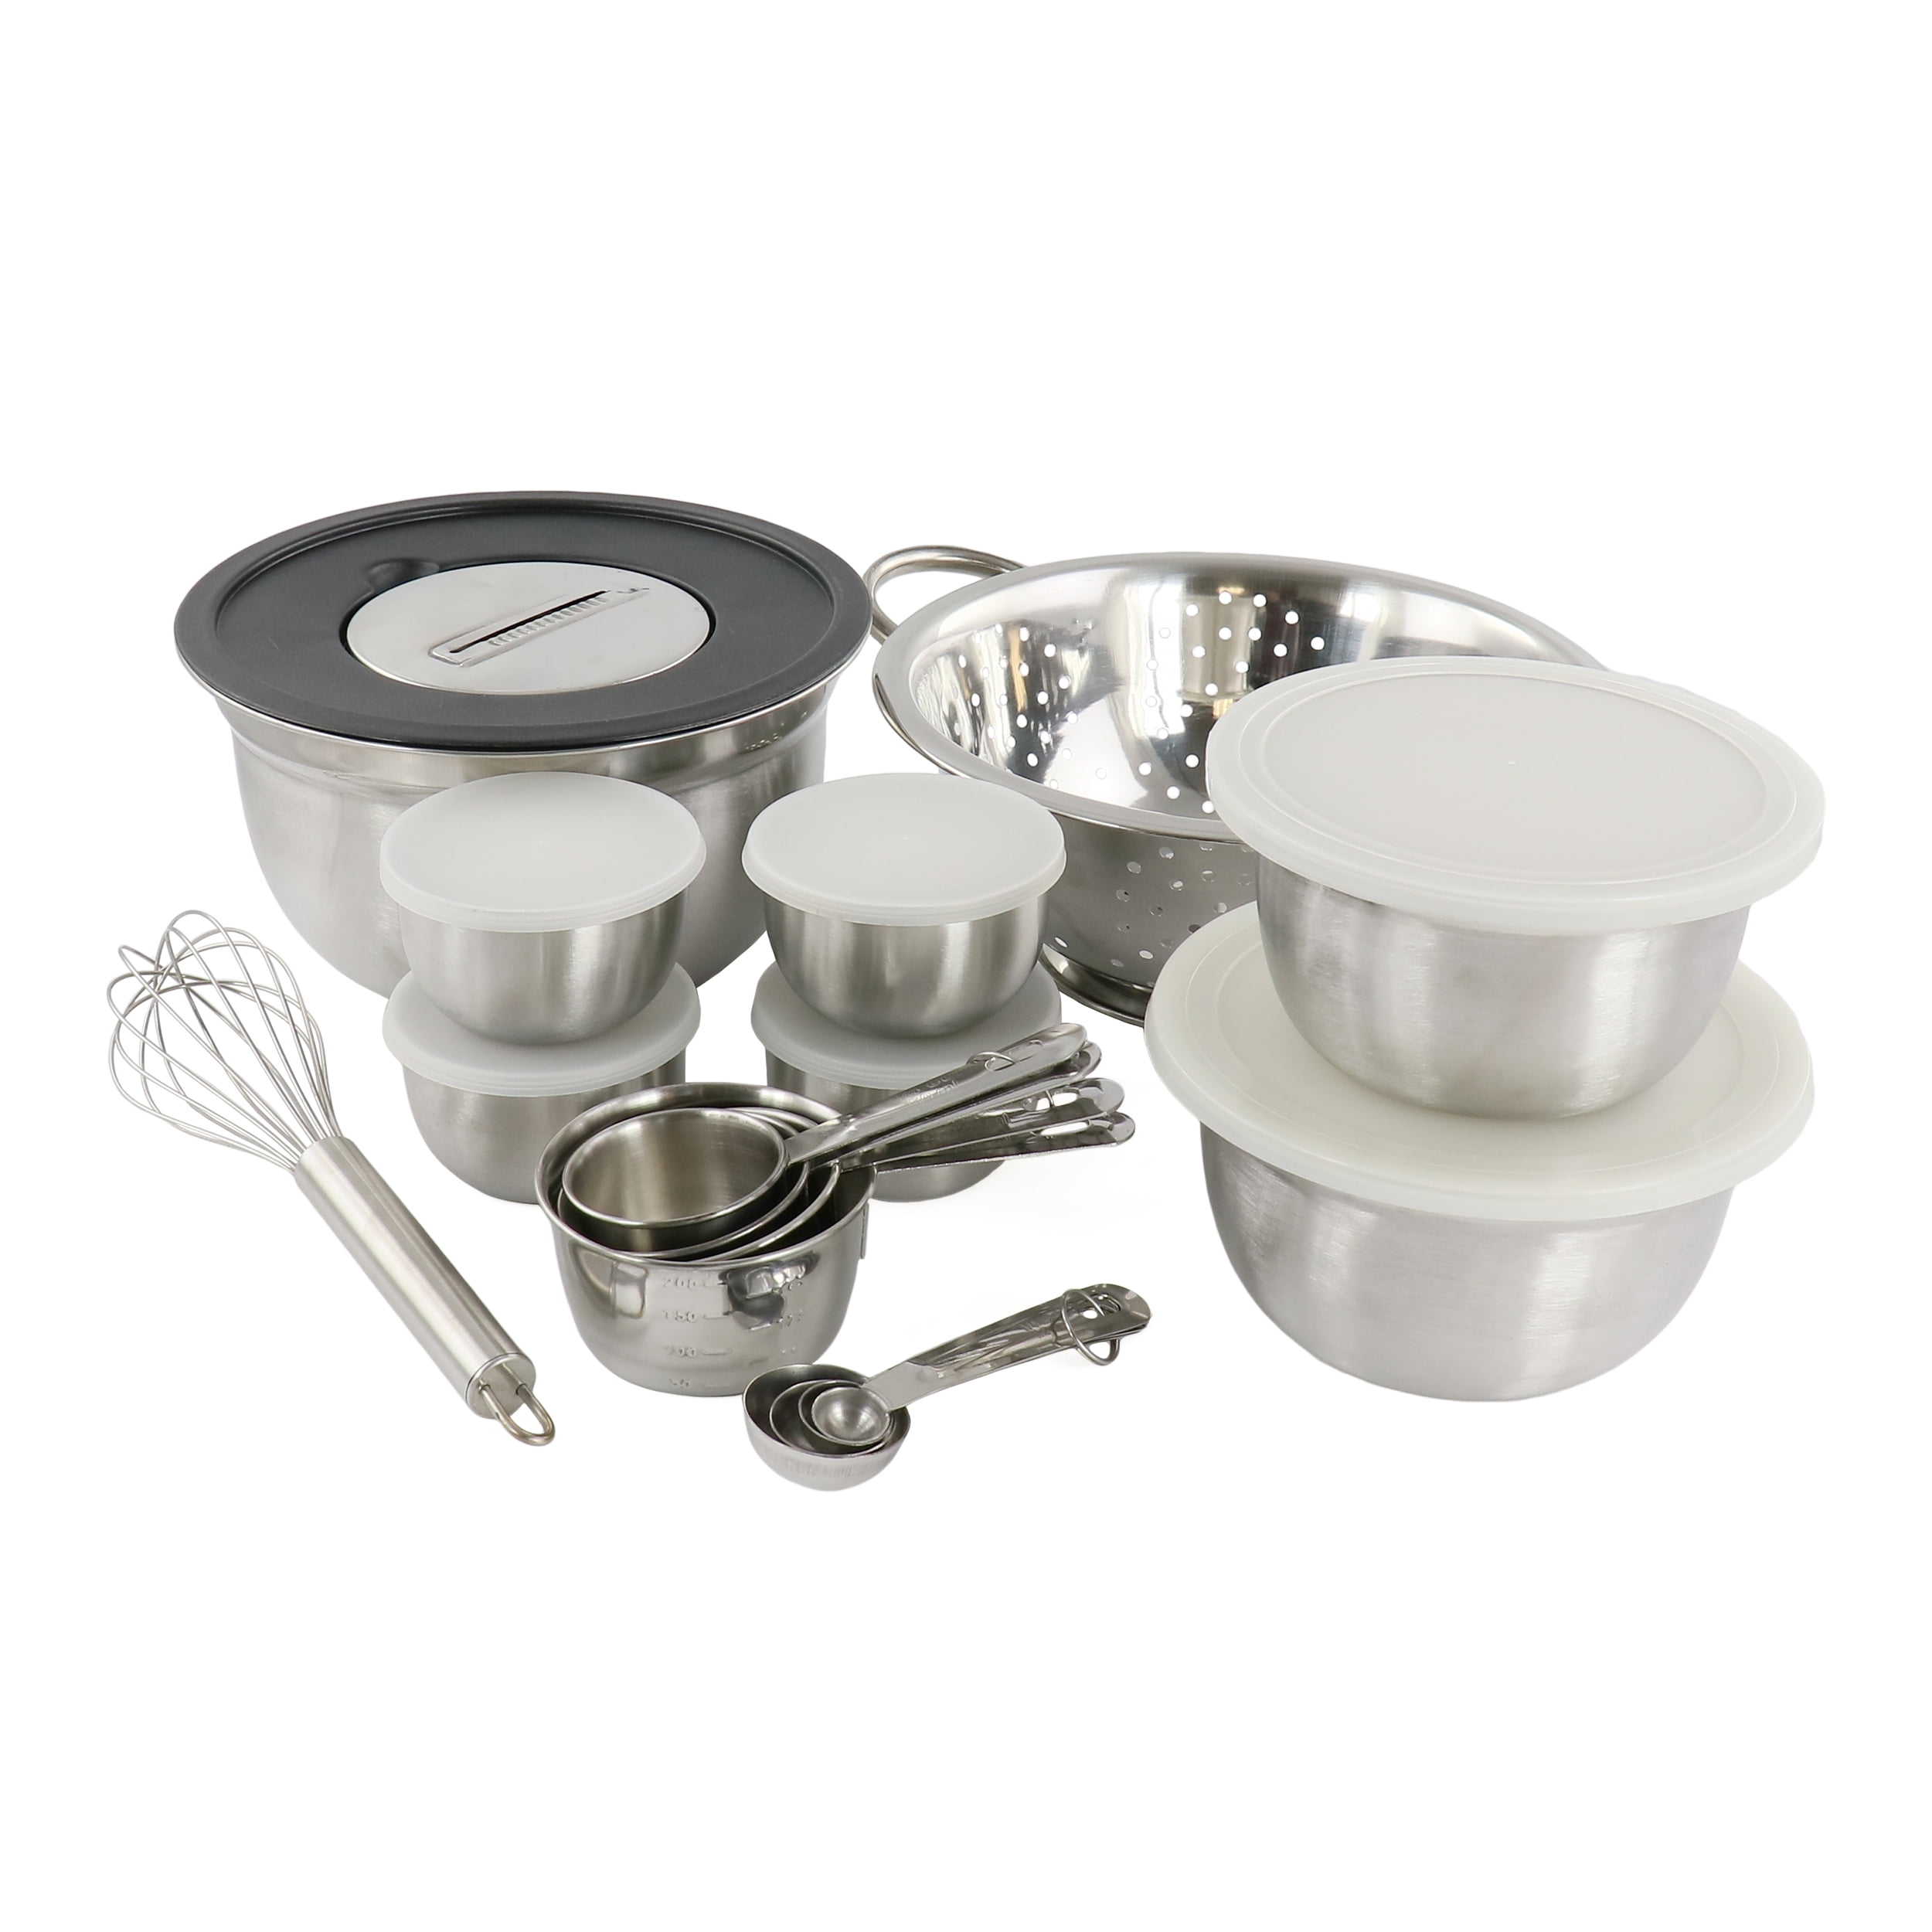 Oster 4 Piece Stainless Steel Measuring Cup Set